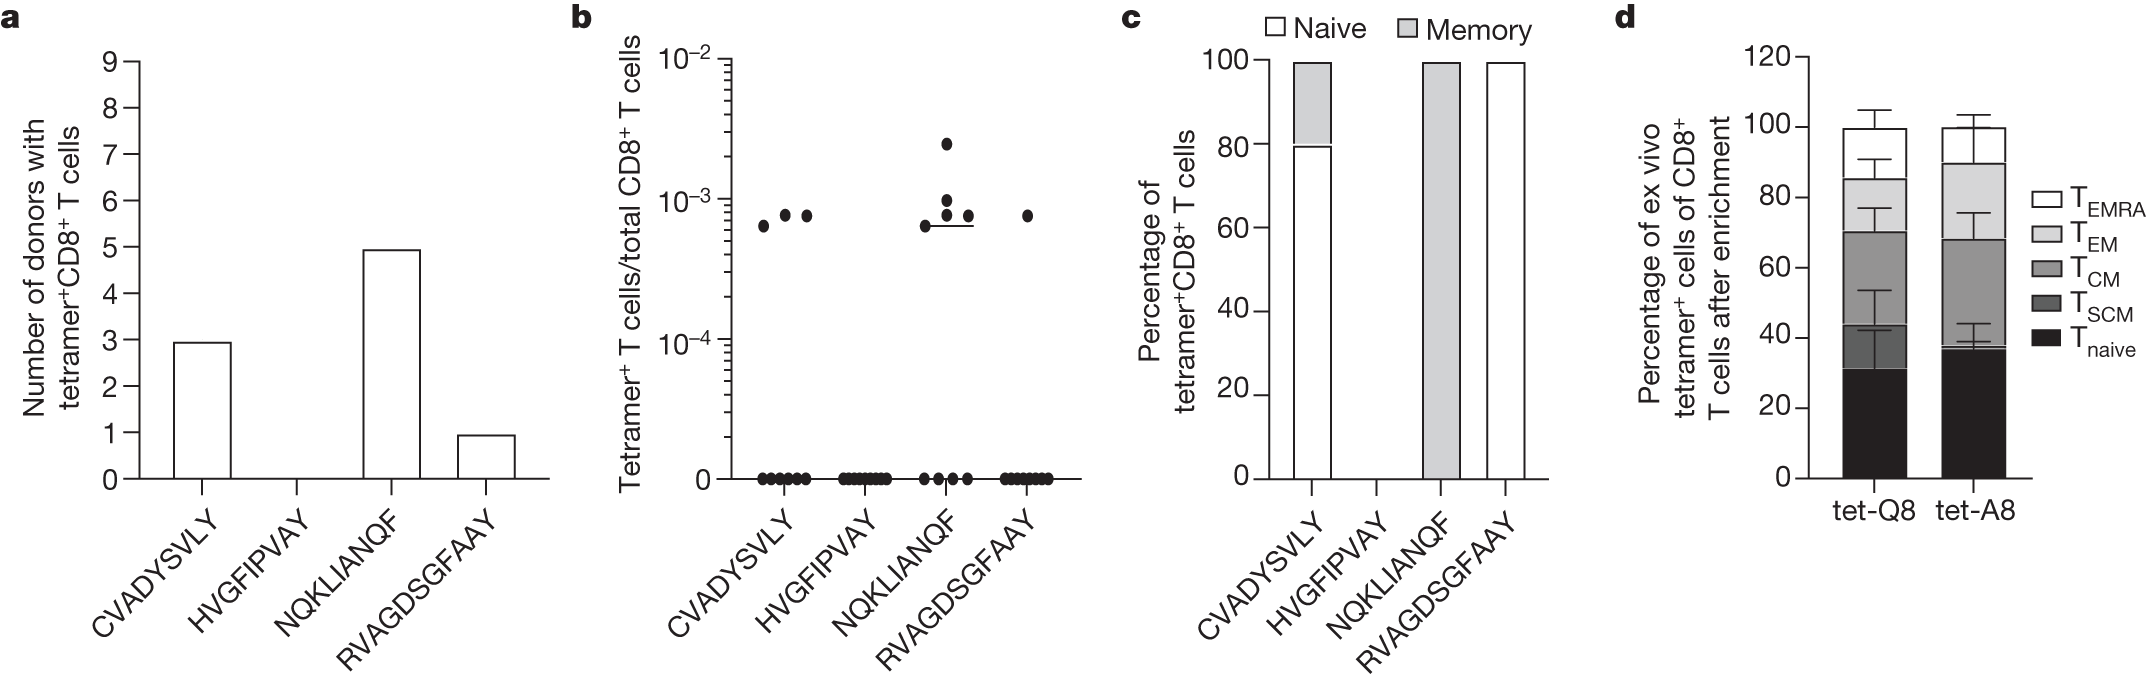 A common allele of HLA is associated with asymptomatic SARS-CoV-2 infection